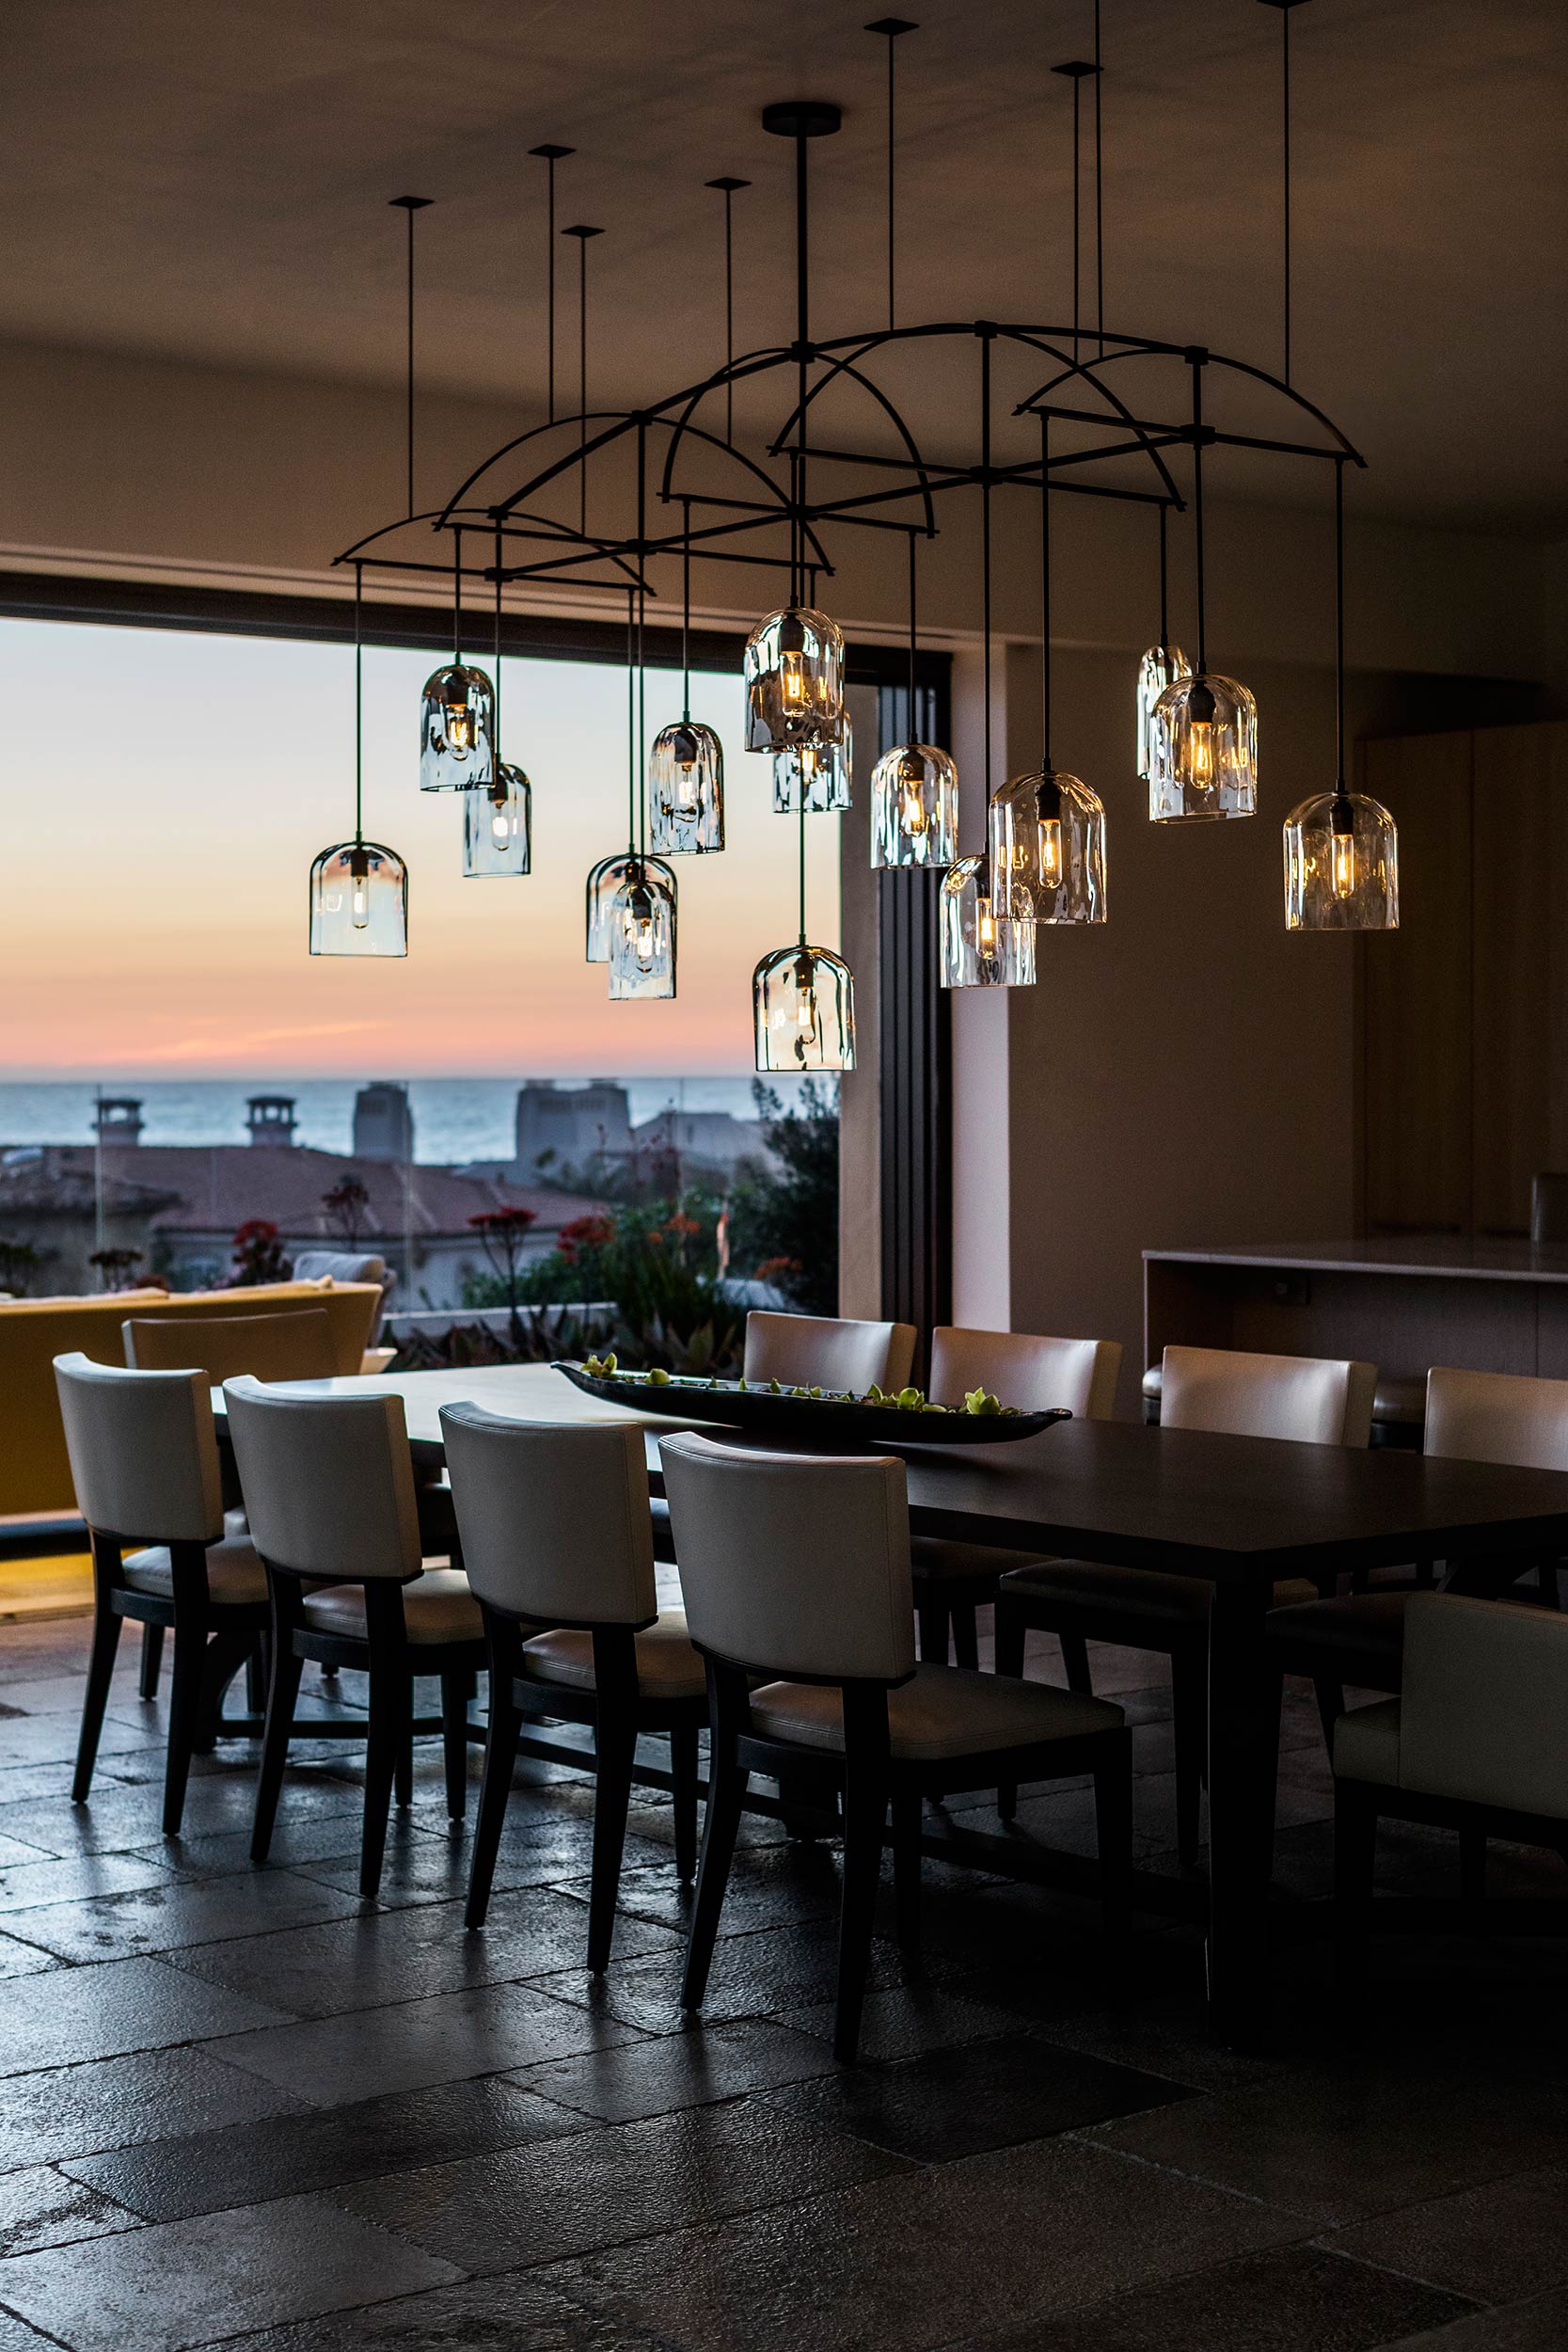 A chandelier over the dining table reflects the dramatic oceanview sunset